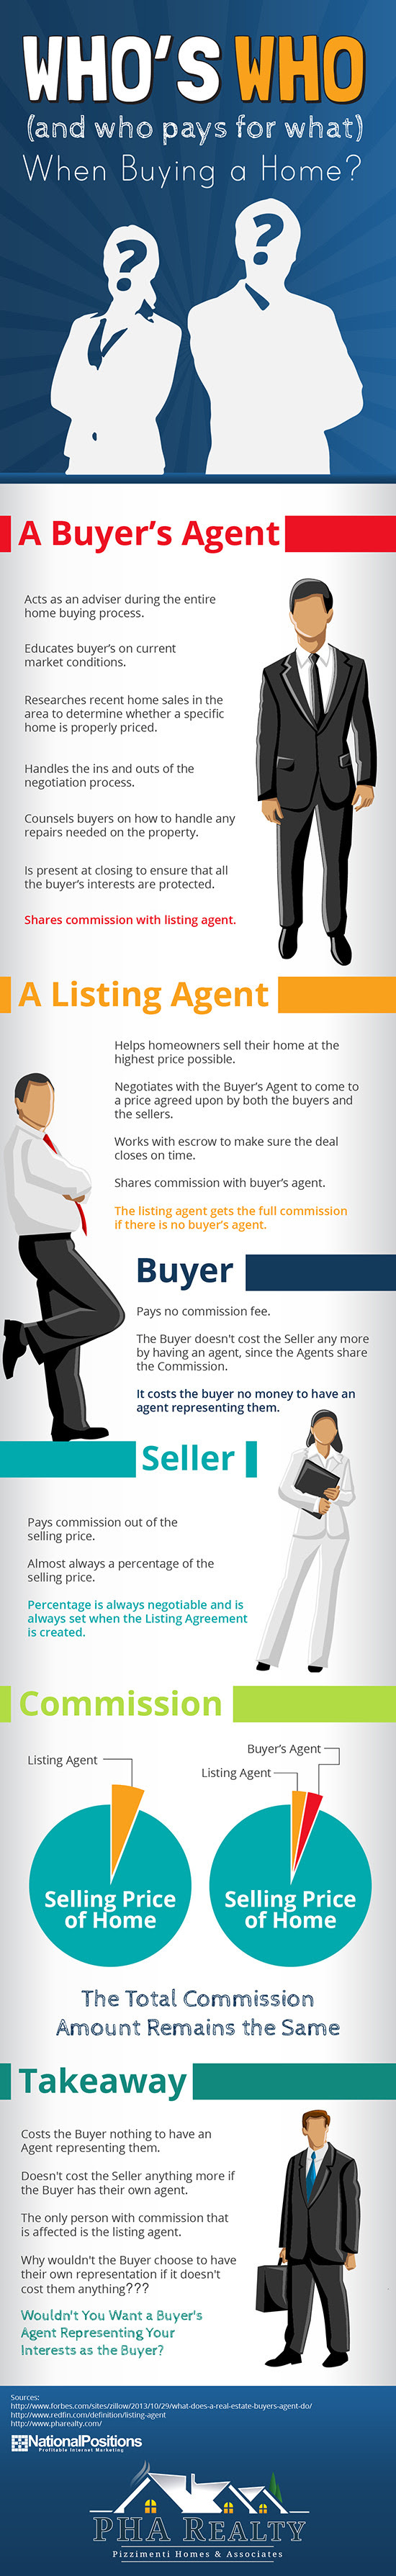 Who's Who (and who pays for what) When Buying a Home? #infographic ...